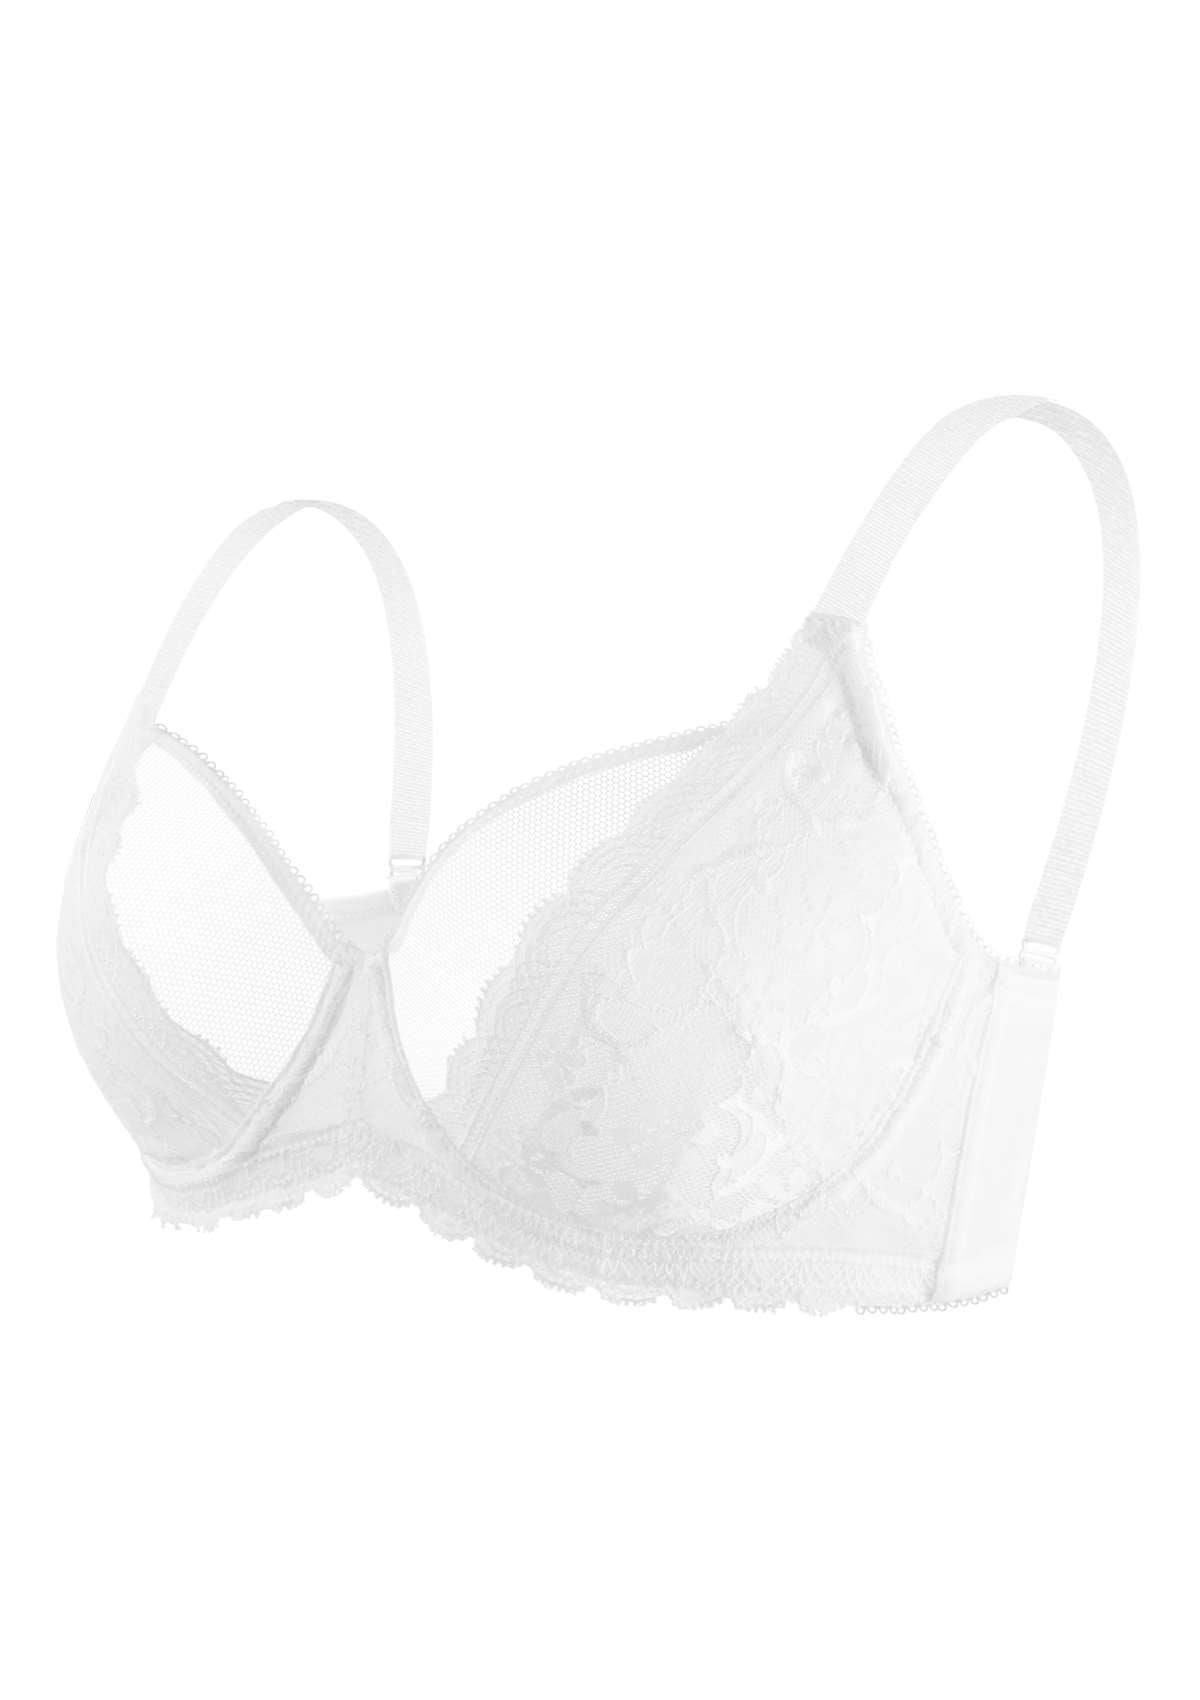 HSIA Anemone Big Bra: Best Bra For Lift And Support, Floral Bra - Light Blue / 40 / DD/E